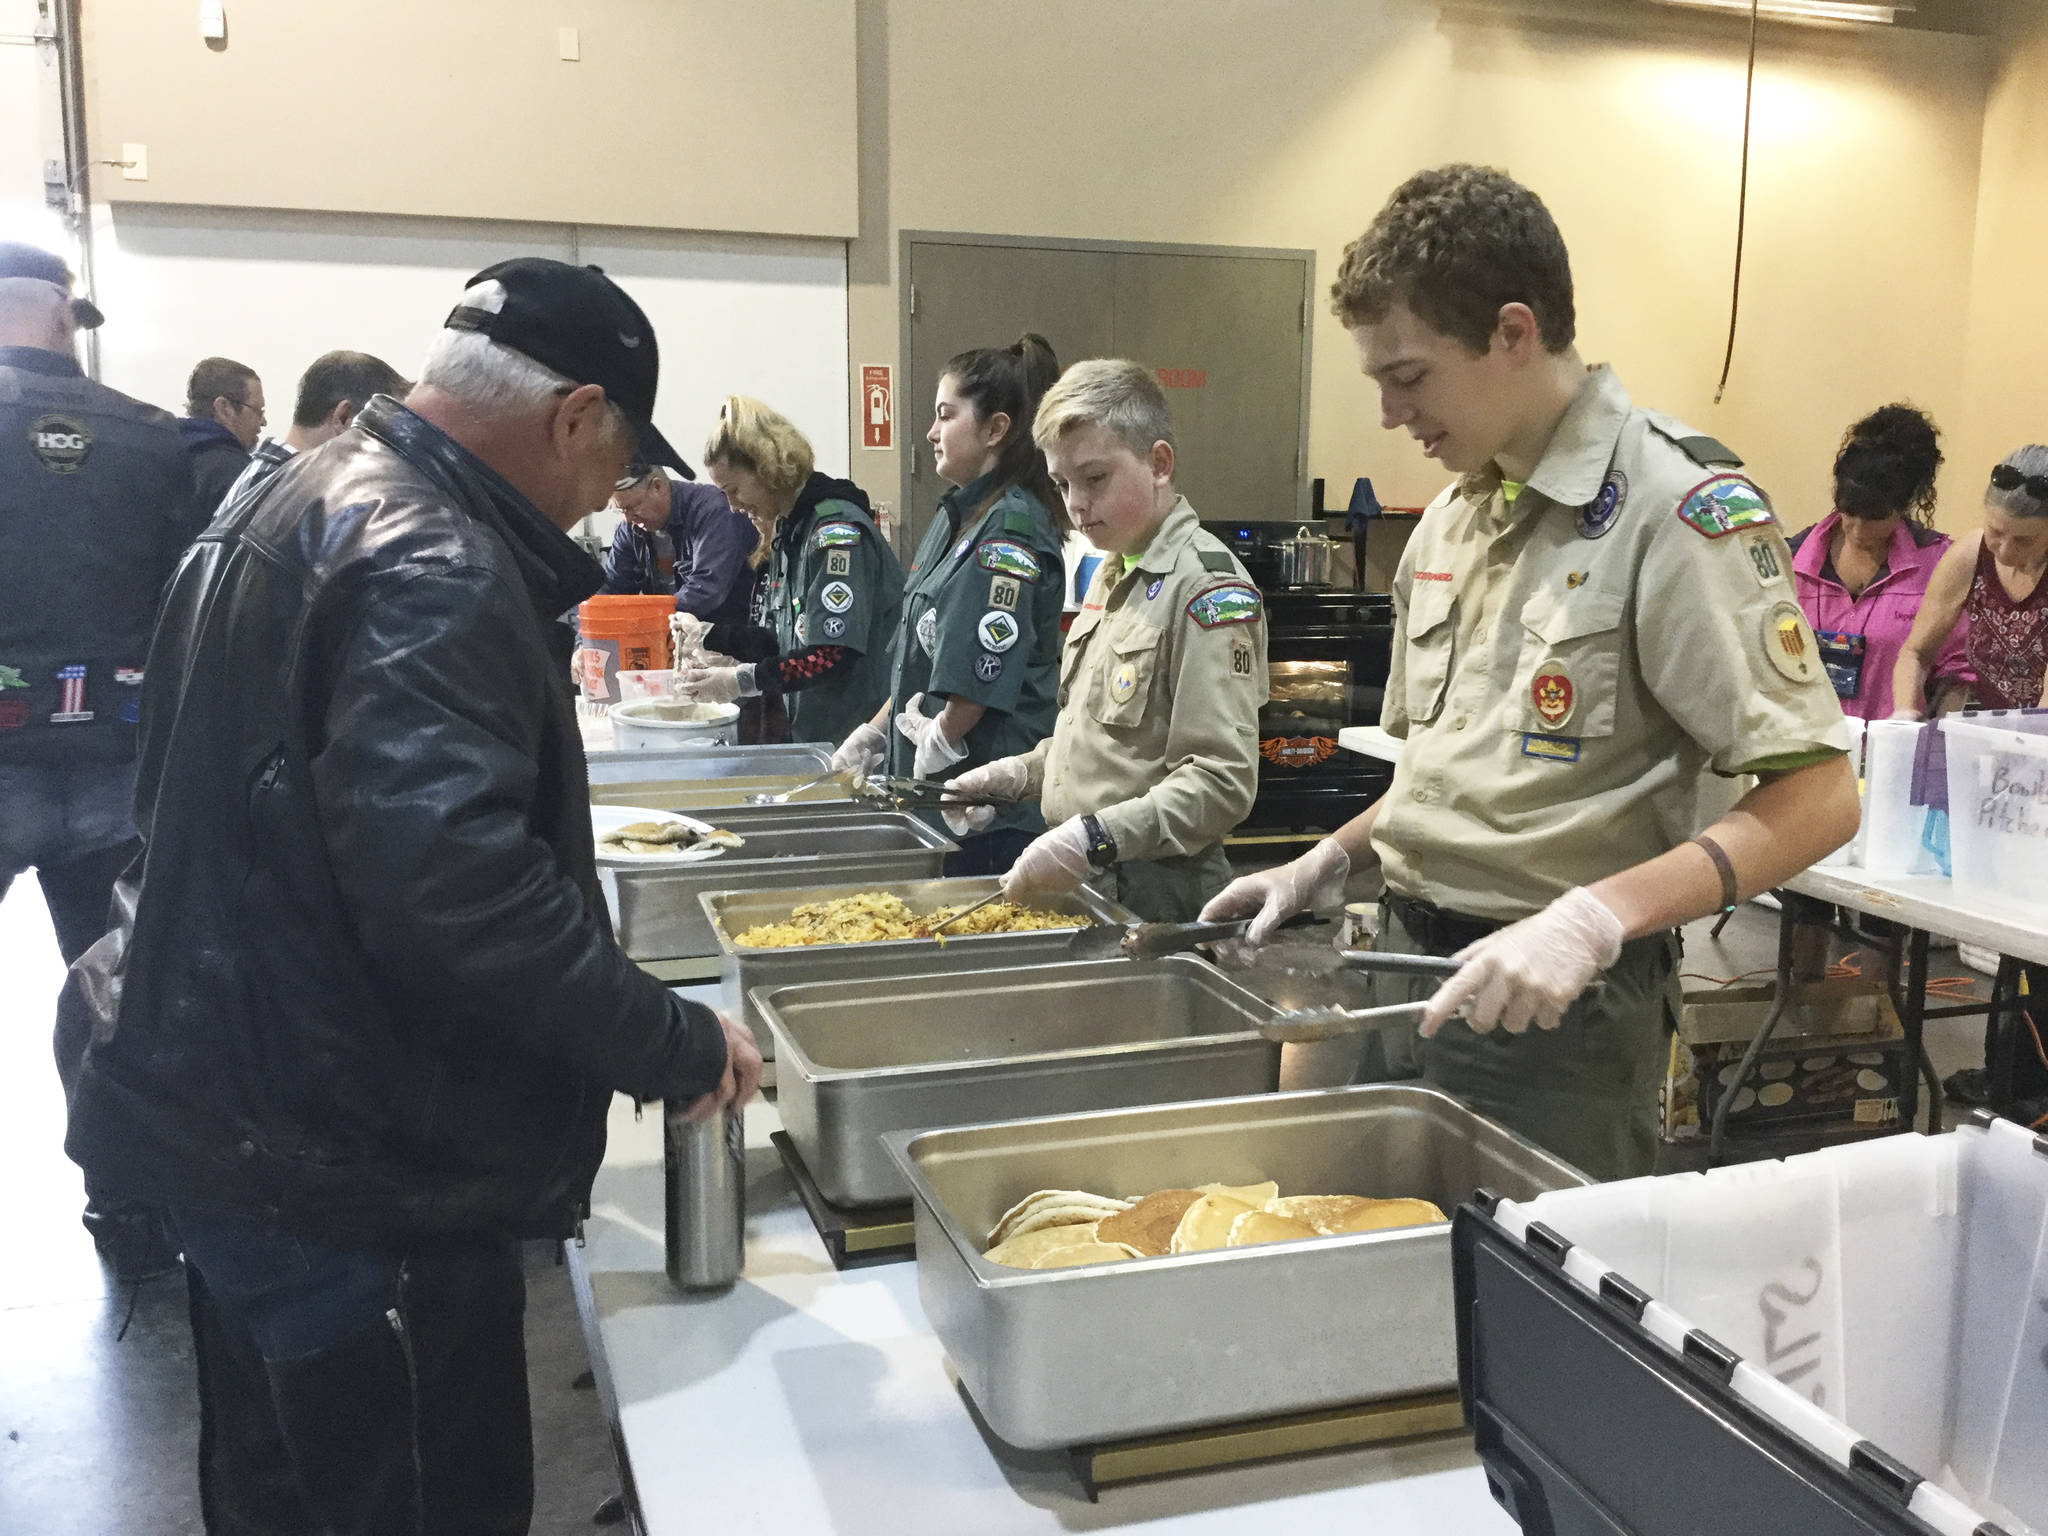 Marysville Troop 80 Boys Scouts and Ventures teens staff serve breakfast to hungry motorcycle riders at Sound Harley-Davidson on their way to the annual Oyster Run in Anacortes. Members of the hosting Marysville Kiwanis Club work behind the scenes cooking and preparing the breakfast and beverages.